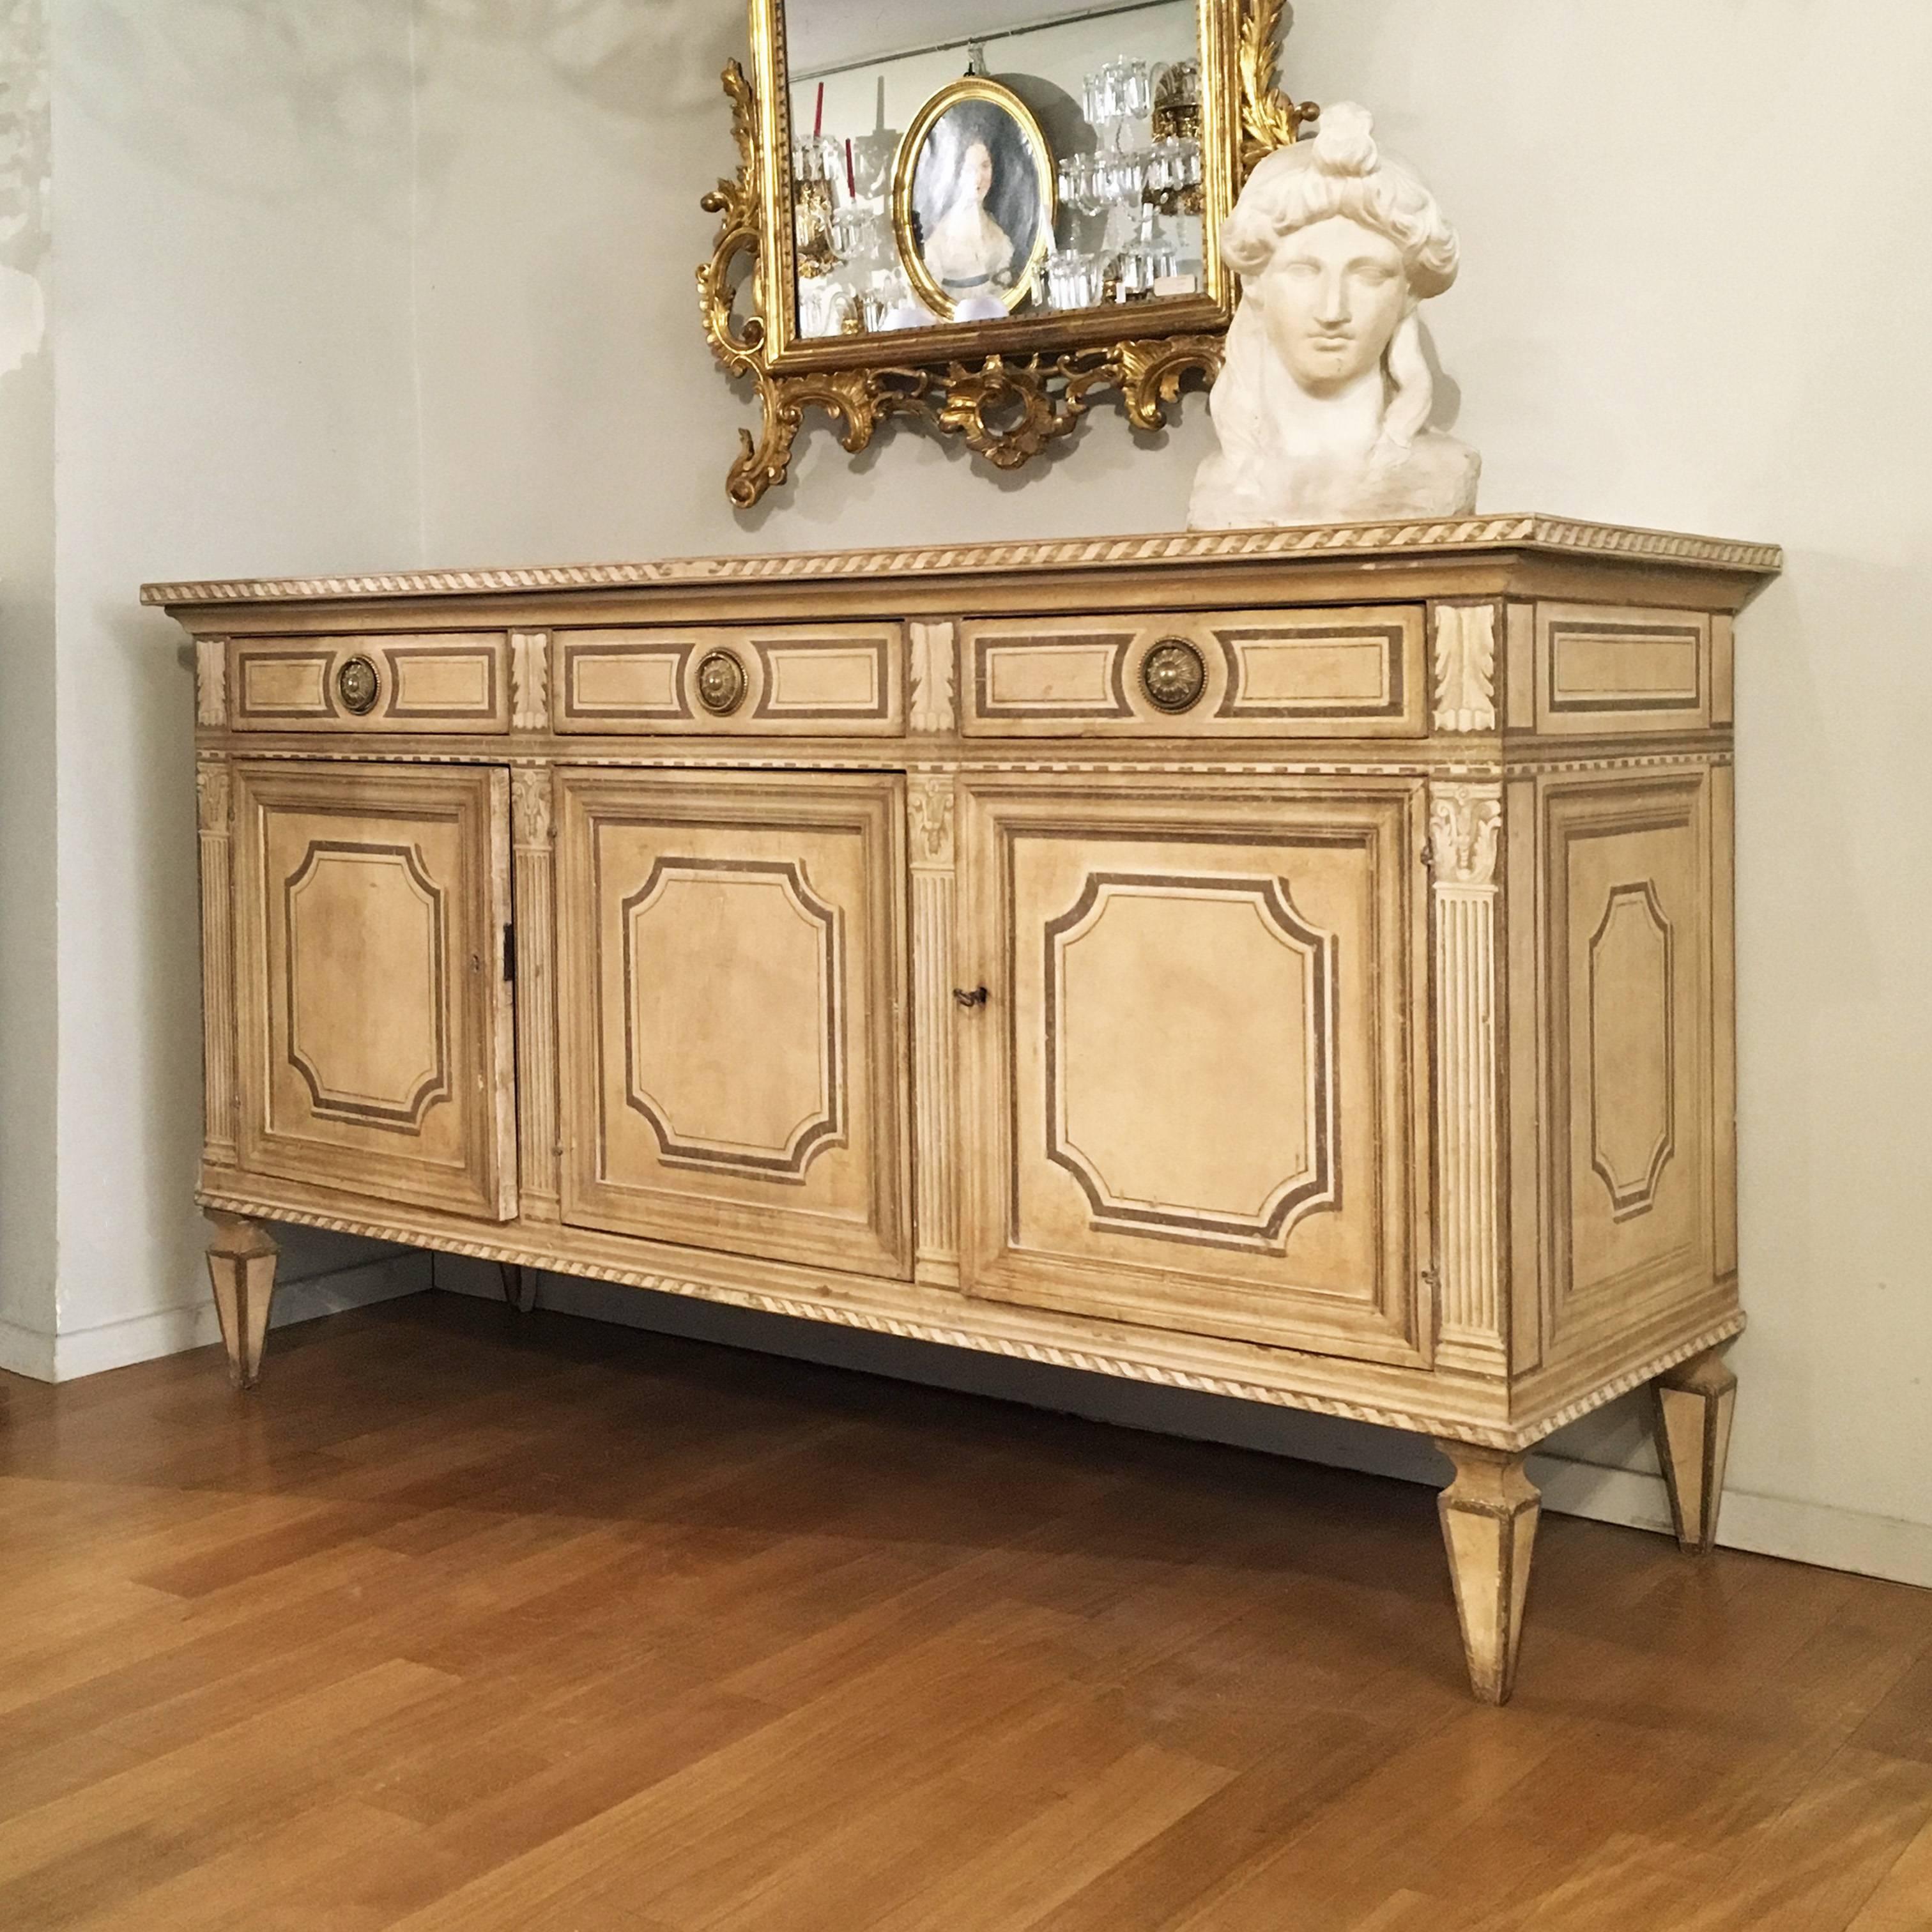 Late 18th Century Neoclassical Italian Credenza in Painted Poplar Wood For Sale 8